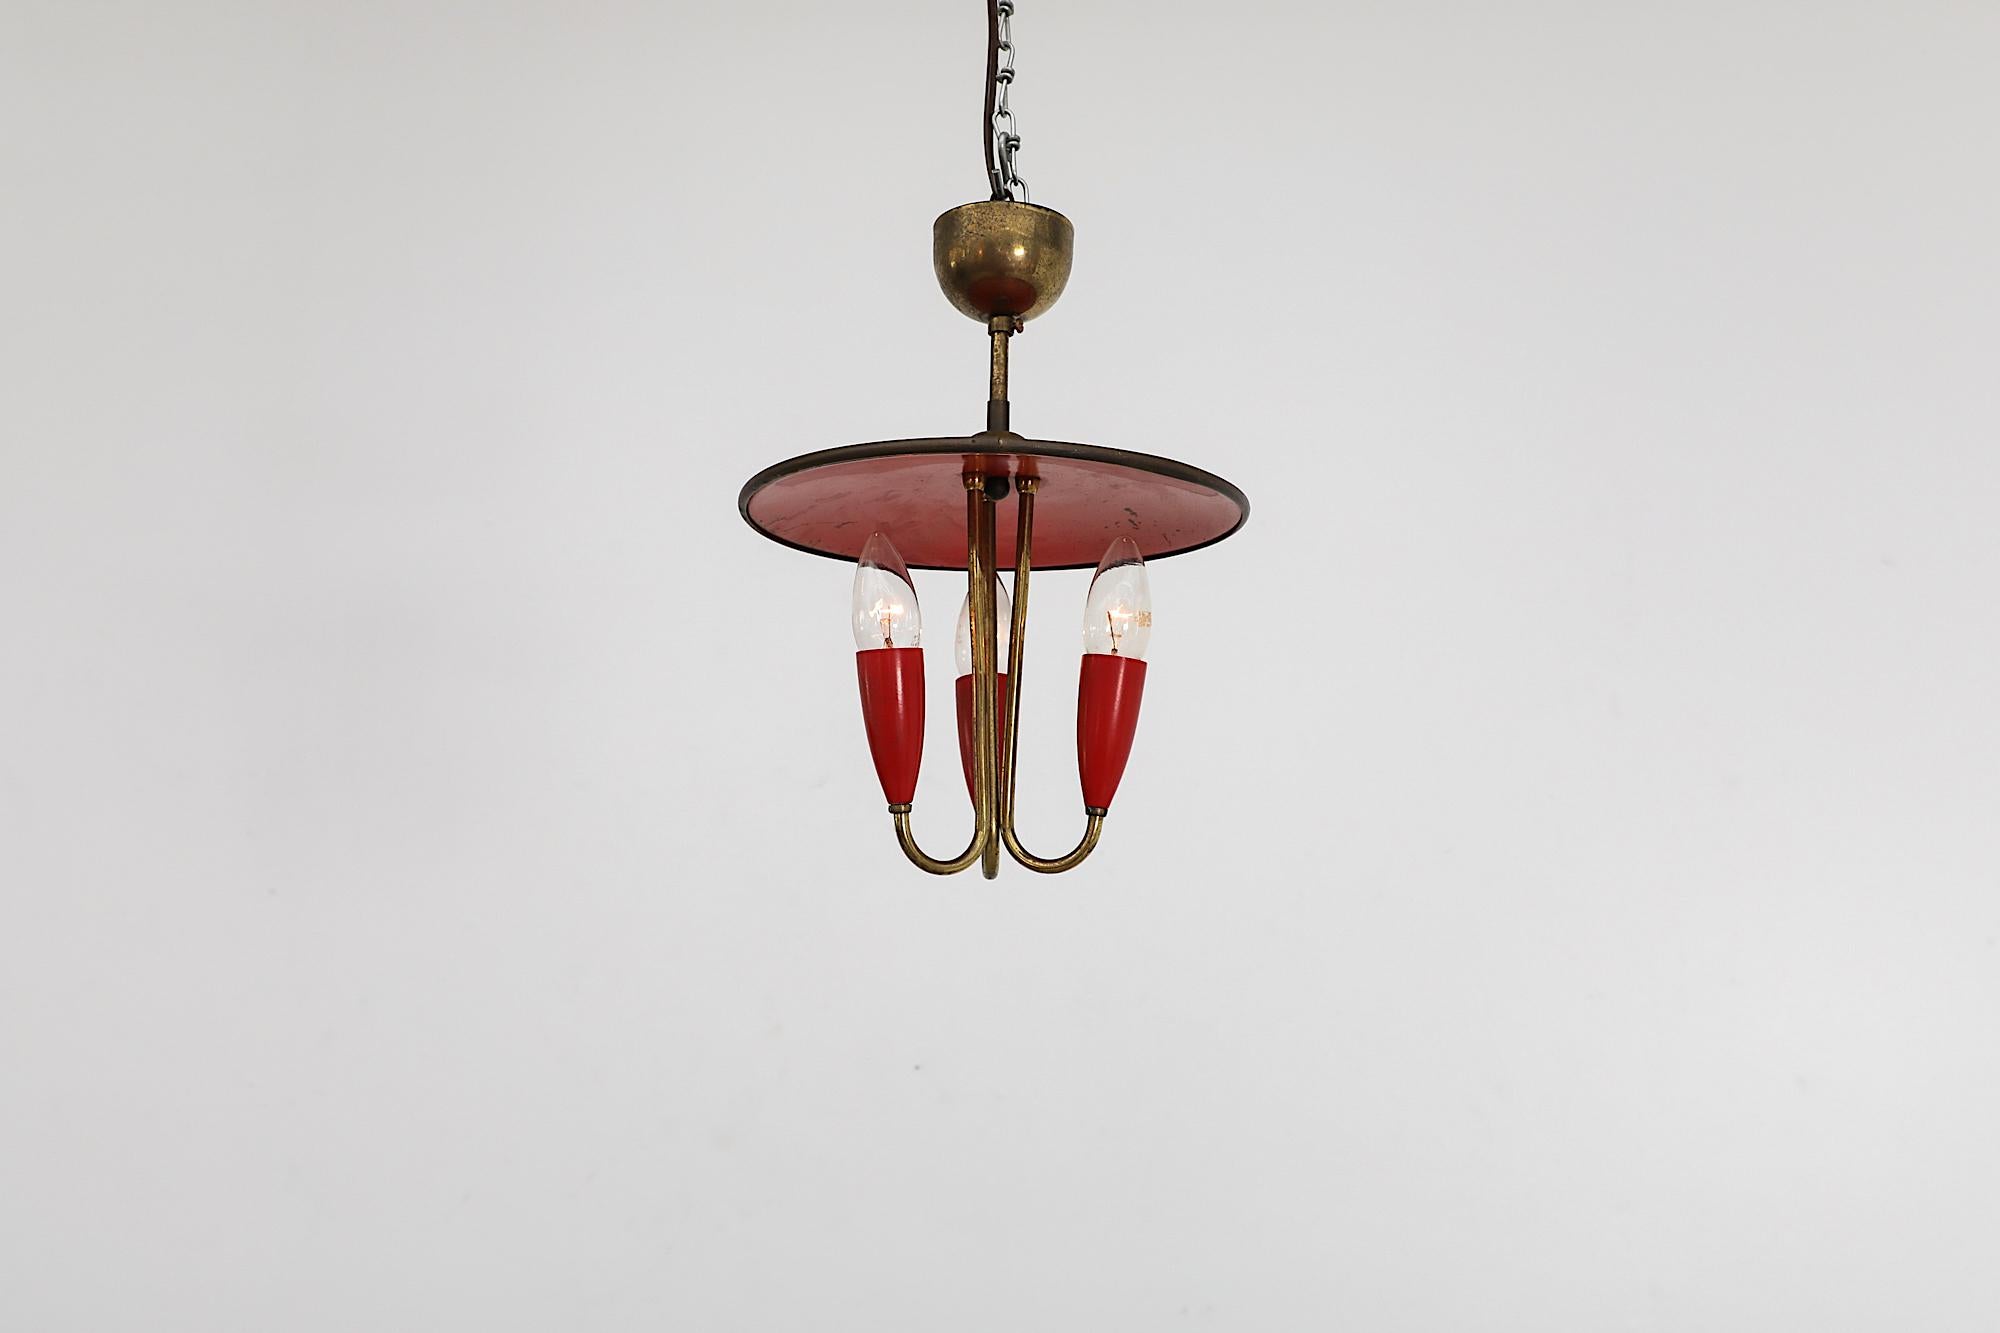 Beautiful brass Stilnovo Style three bulb chandelier with red enameled metal top shade and matching red socket holders. The lamp has EU candelabra sockets. In original condition with visible wear and patina, including tarnishing to the brass and